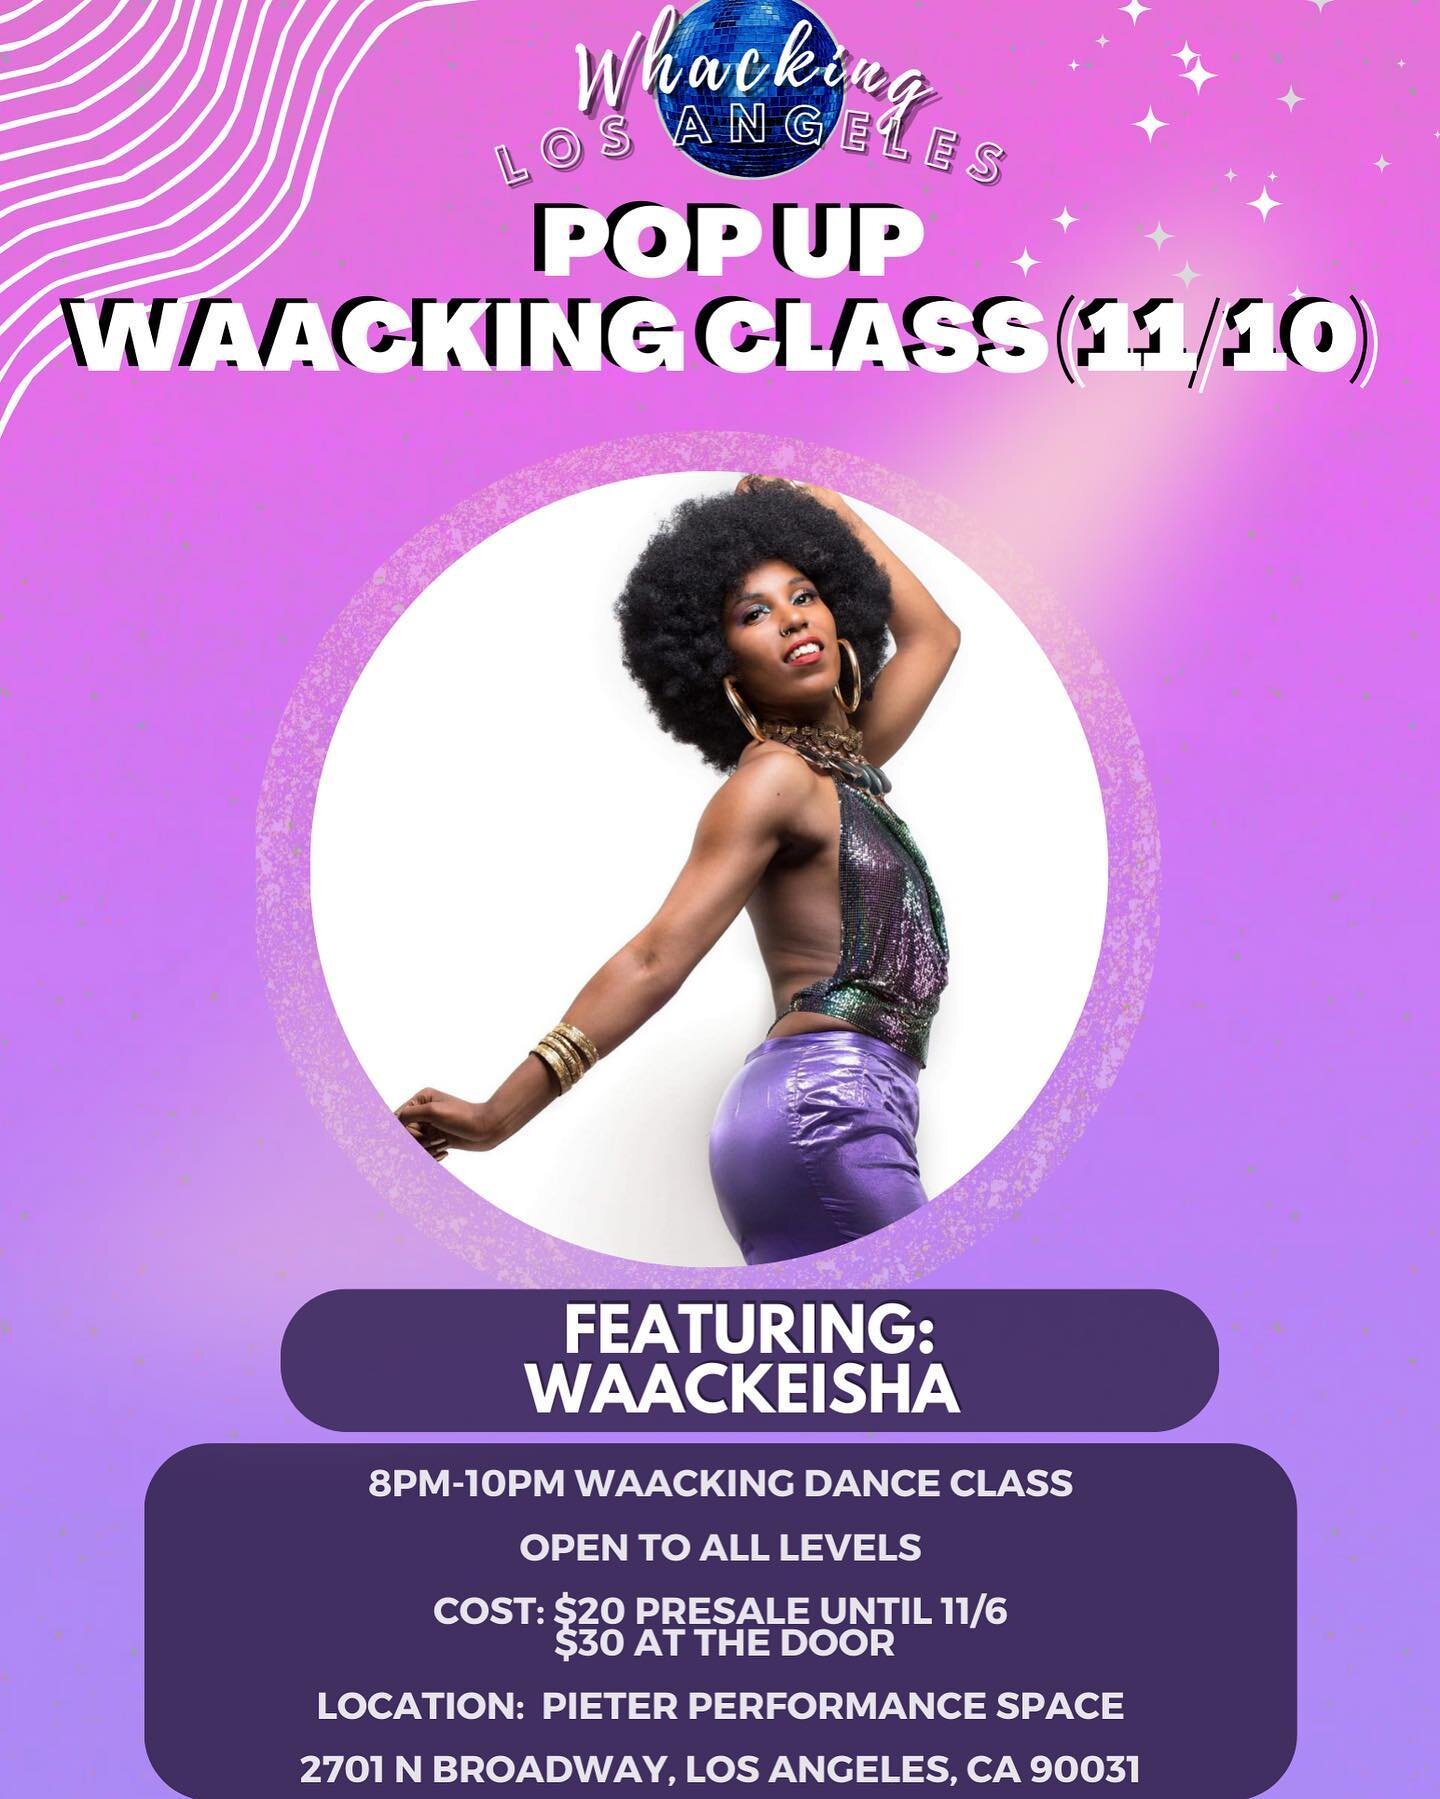 Save the date! We have a special pop up happening right before @fssworldwide &lsquo;s battle featuring class from the one and only Waackeisha @leahmaatmcfly 🪩✨ Come out and take class! Reserve your spot now with the special presale cost!

$20 Presal